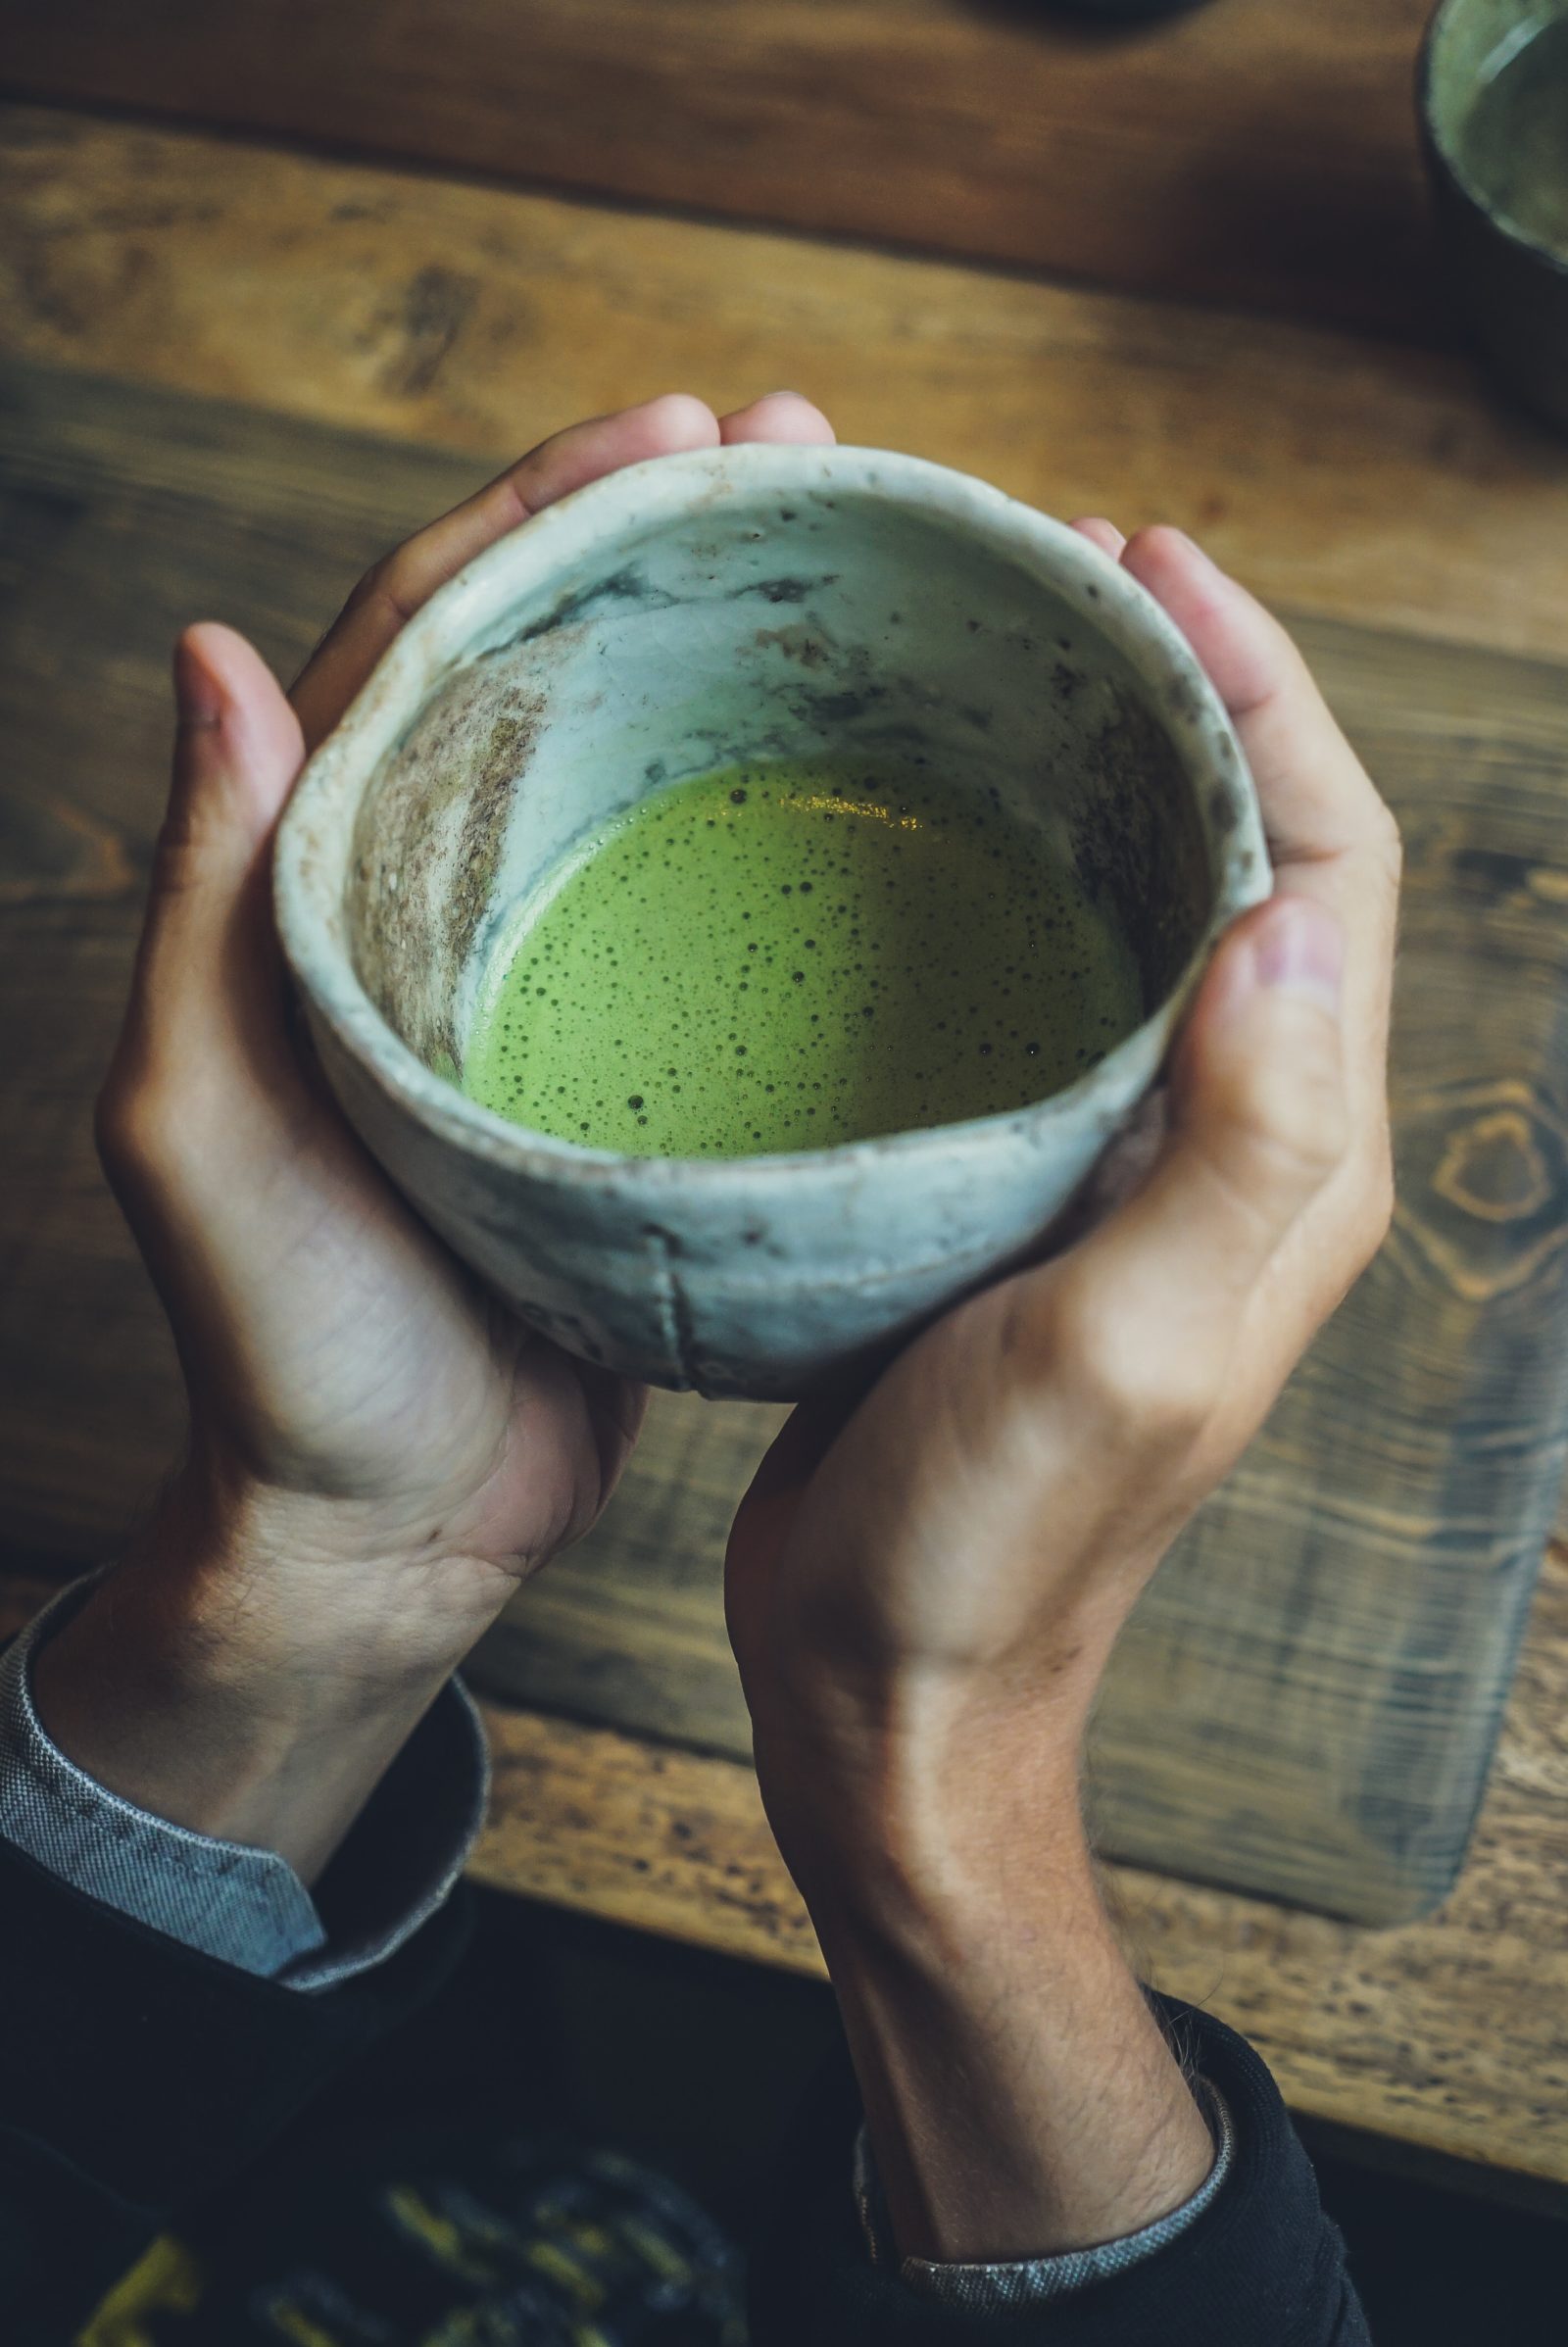 Matcha green tea in a clay cup in a person's hands